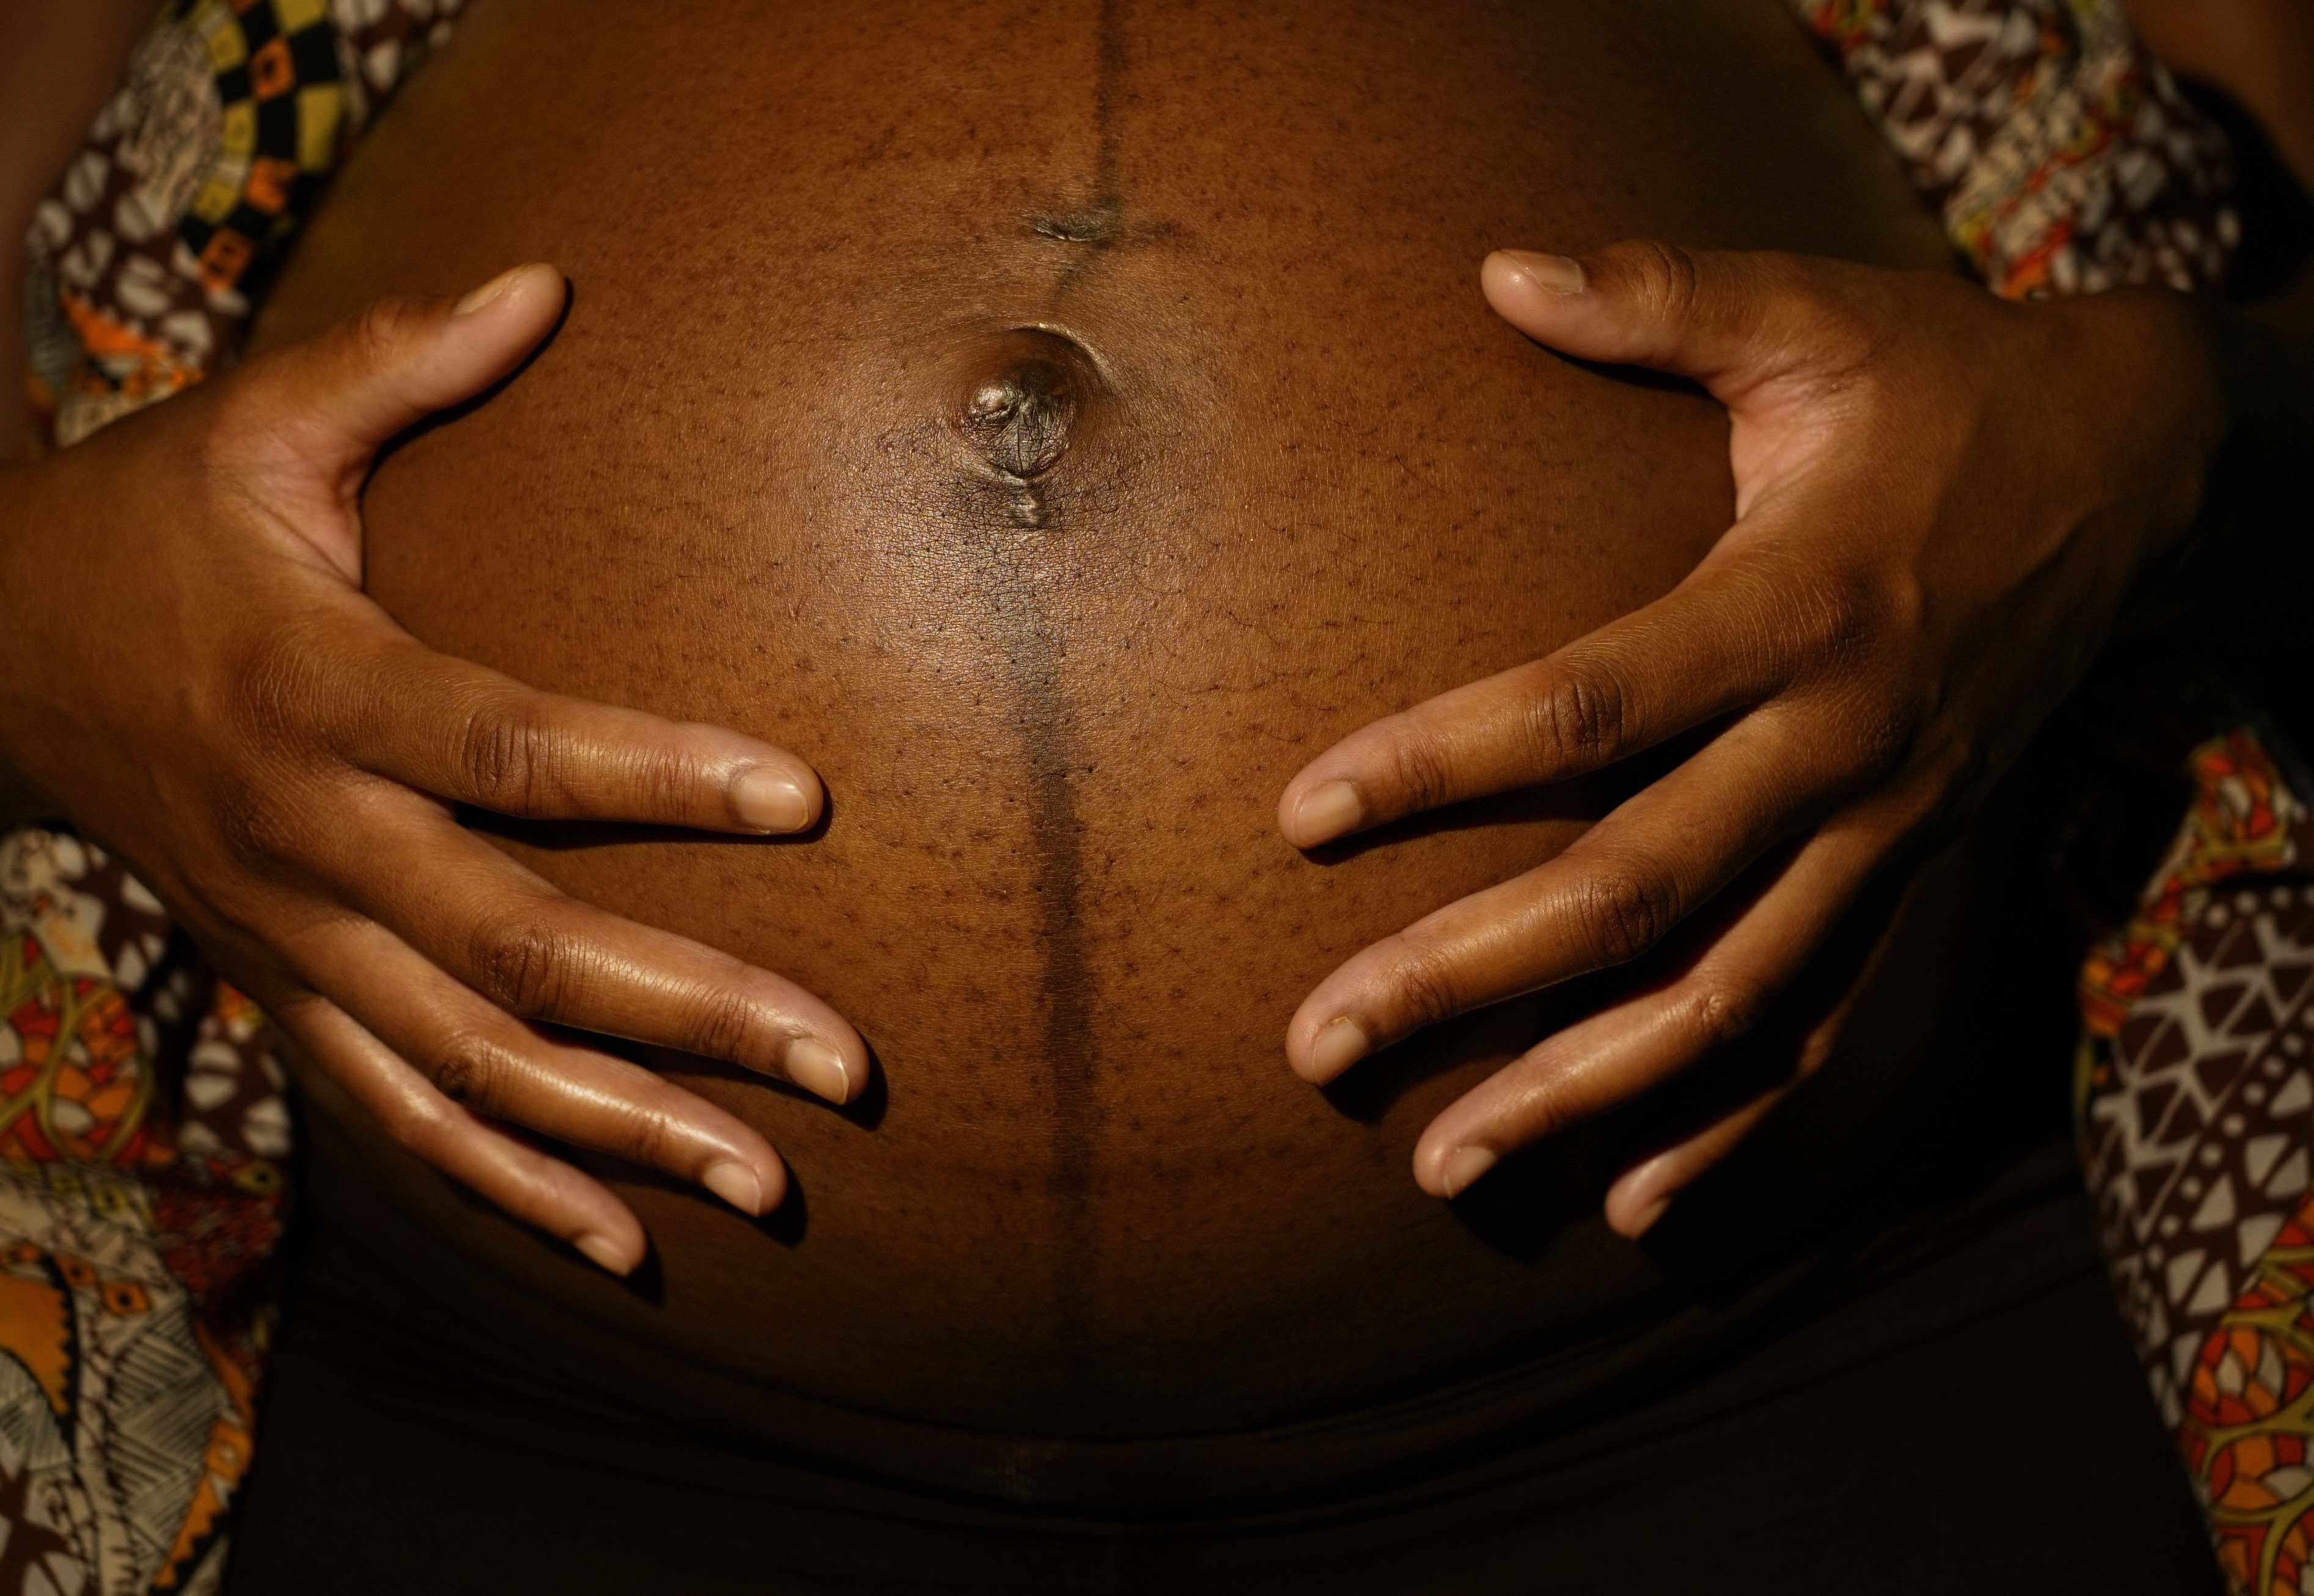 Black woman's hands on her pregnant belly